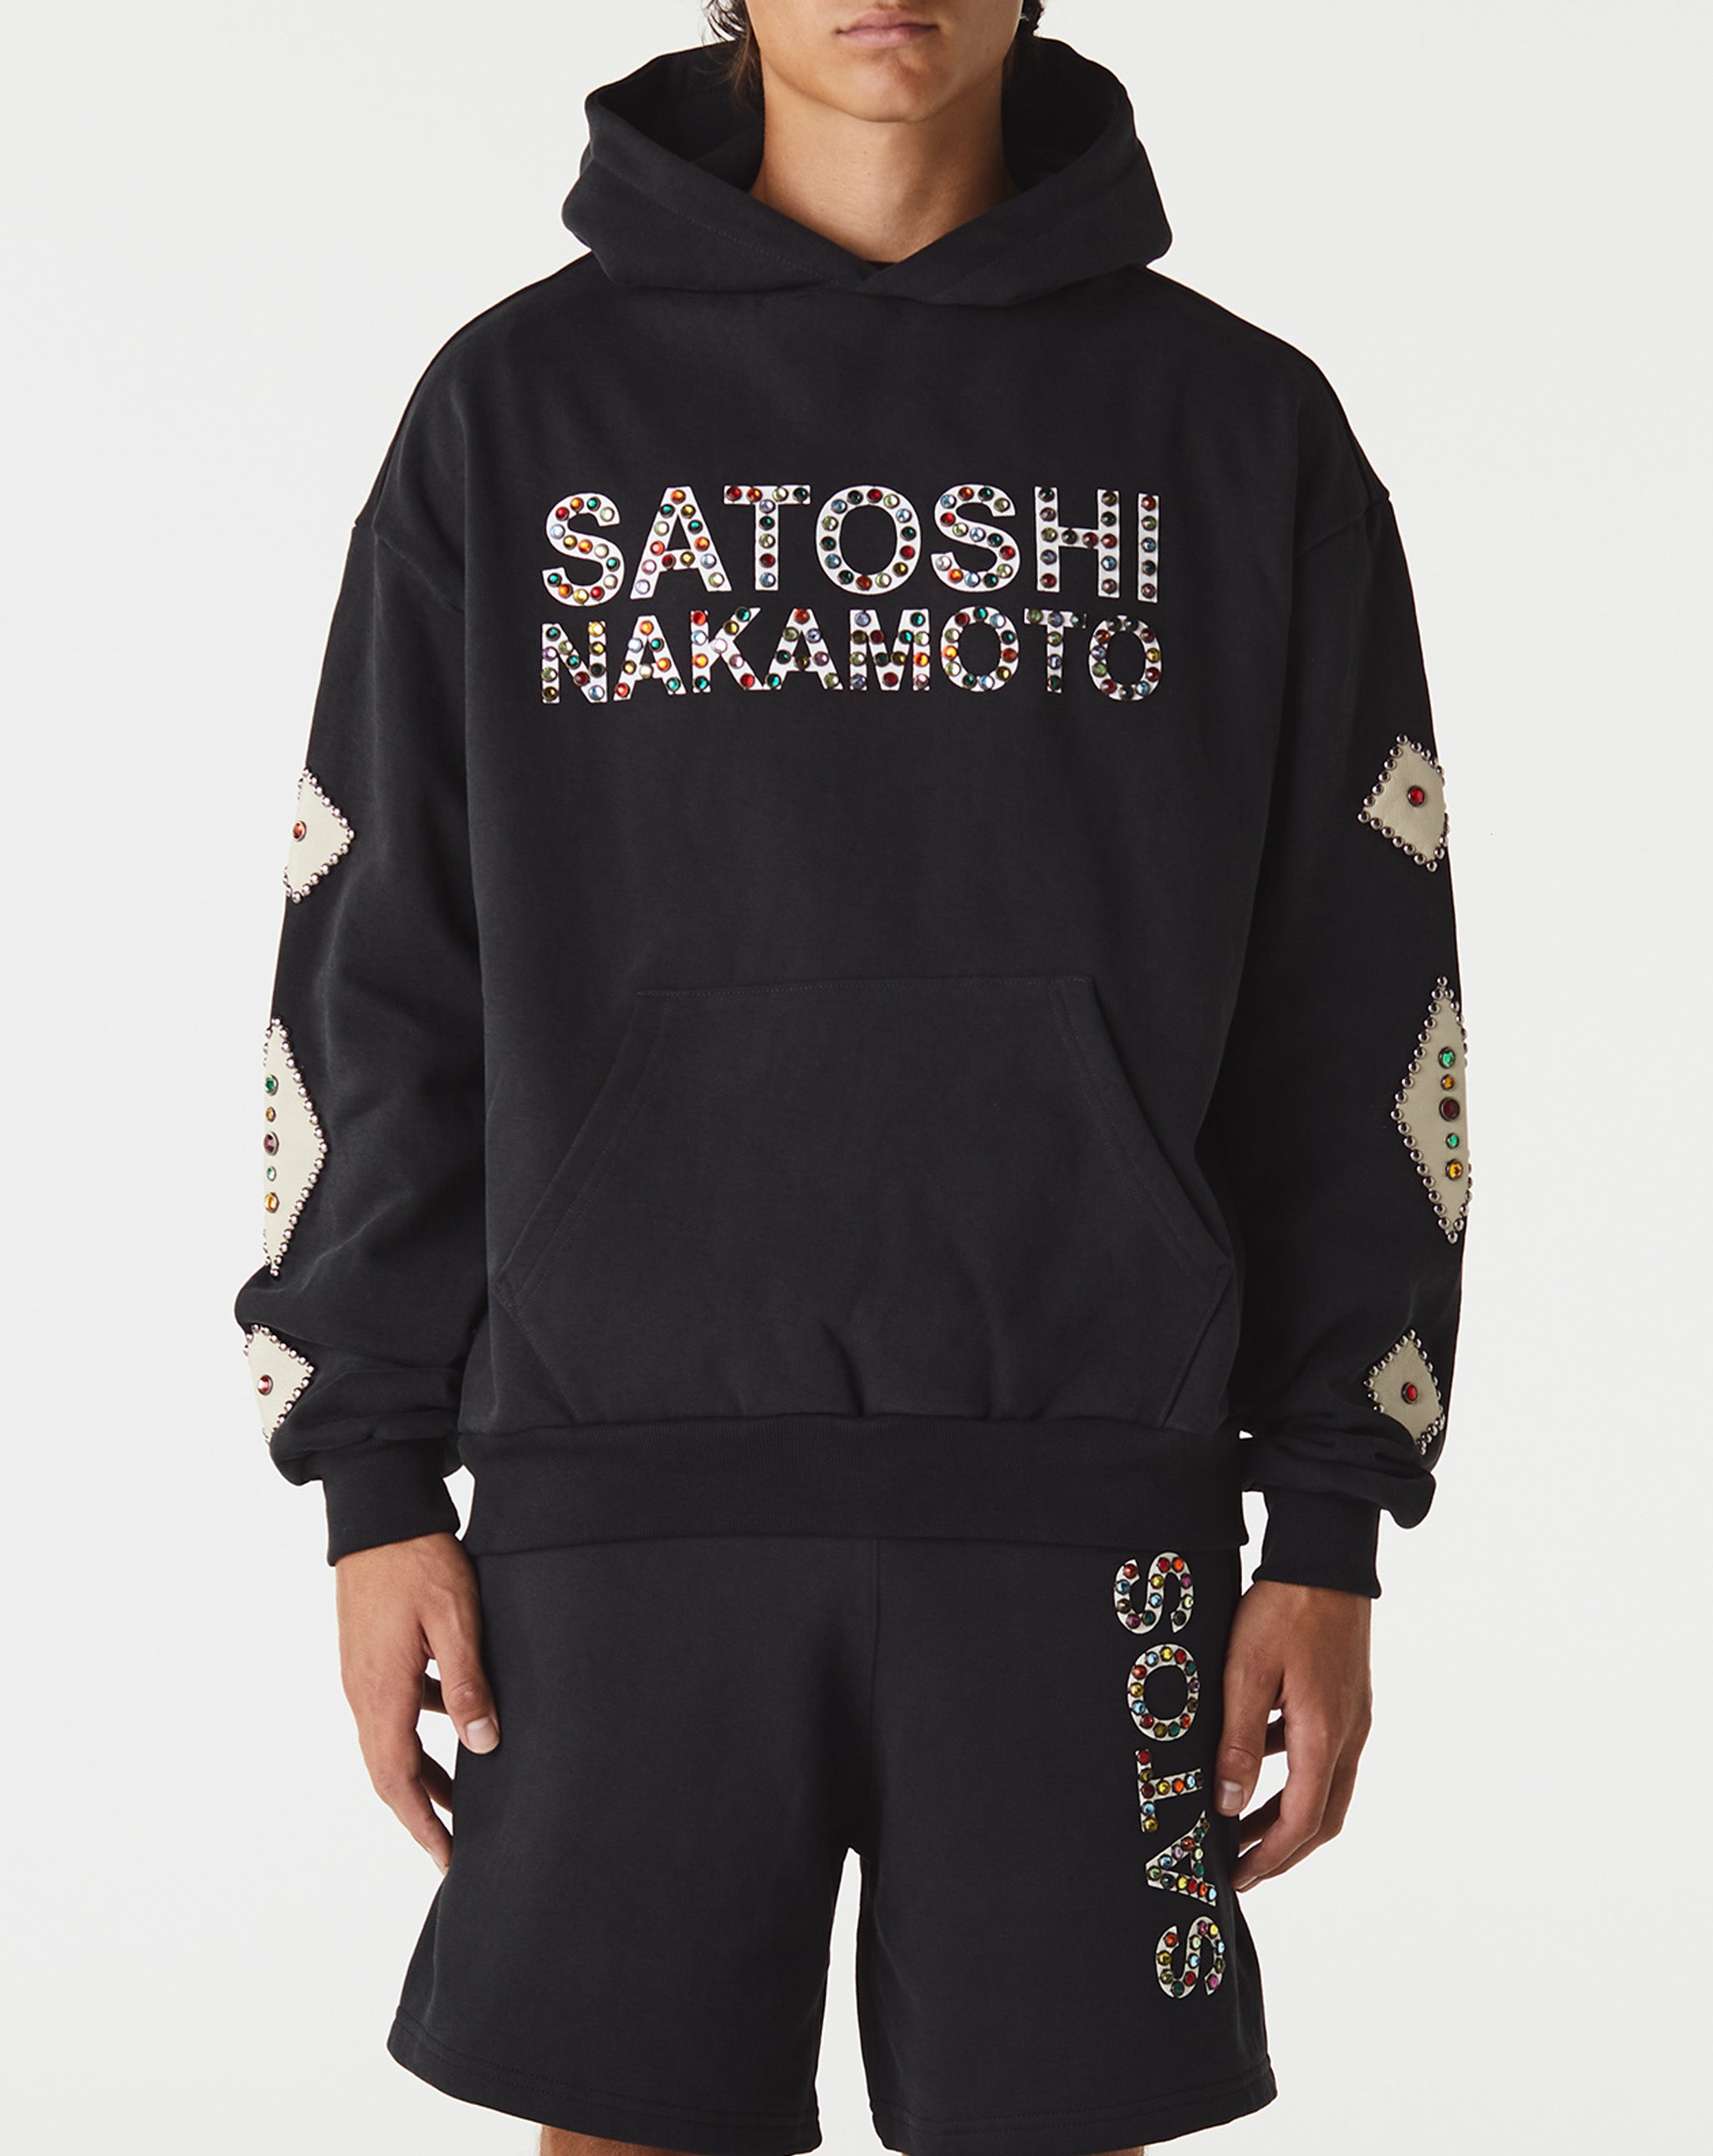 Satoshi Nakamoto Other Scenes Army Hoodie  - Cheap Cerbe Jordan outlet